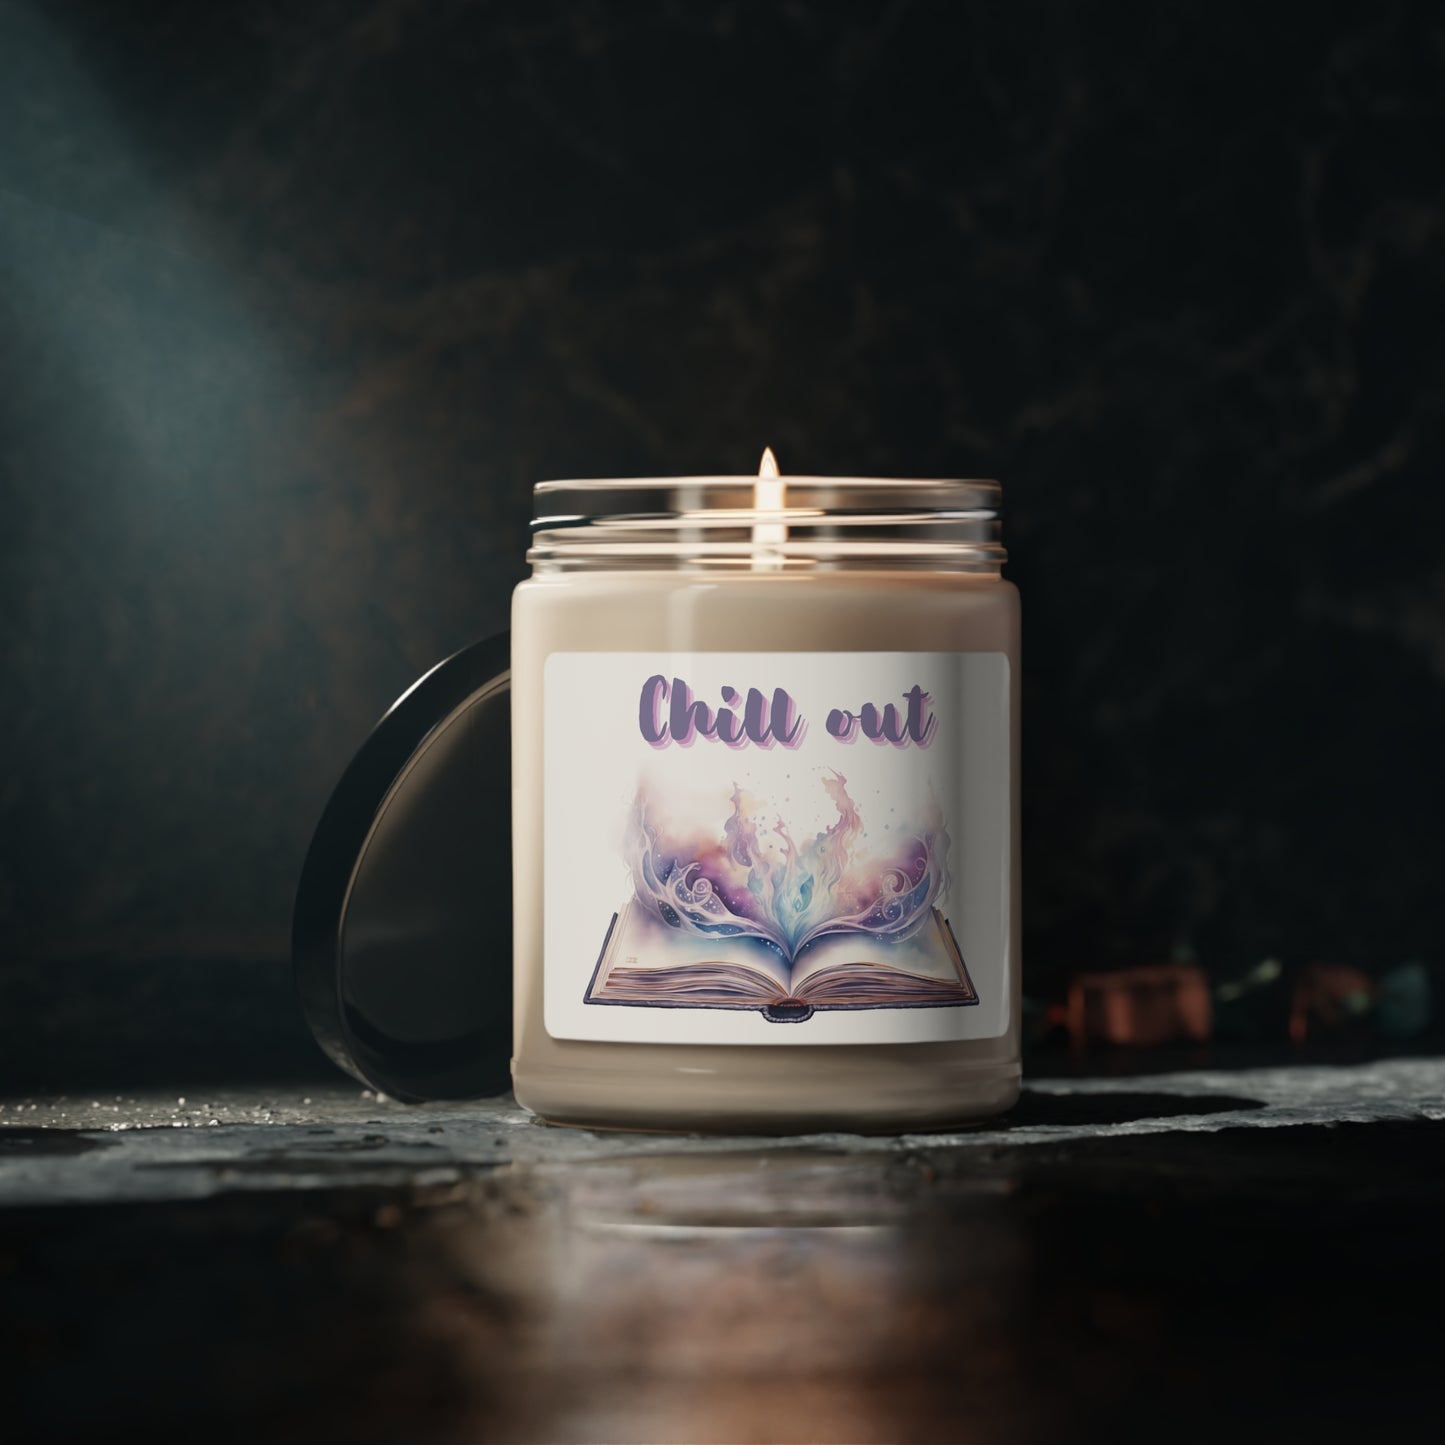 Chill Out, Scented Soy Candle, 9oz